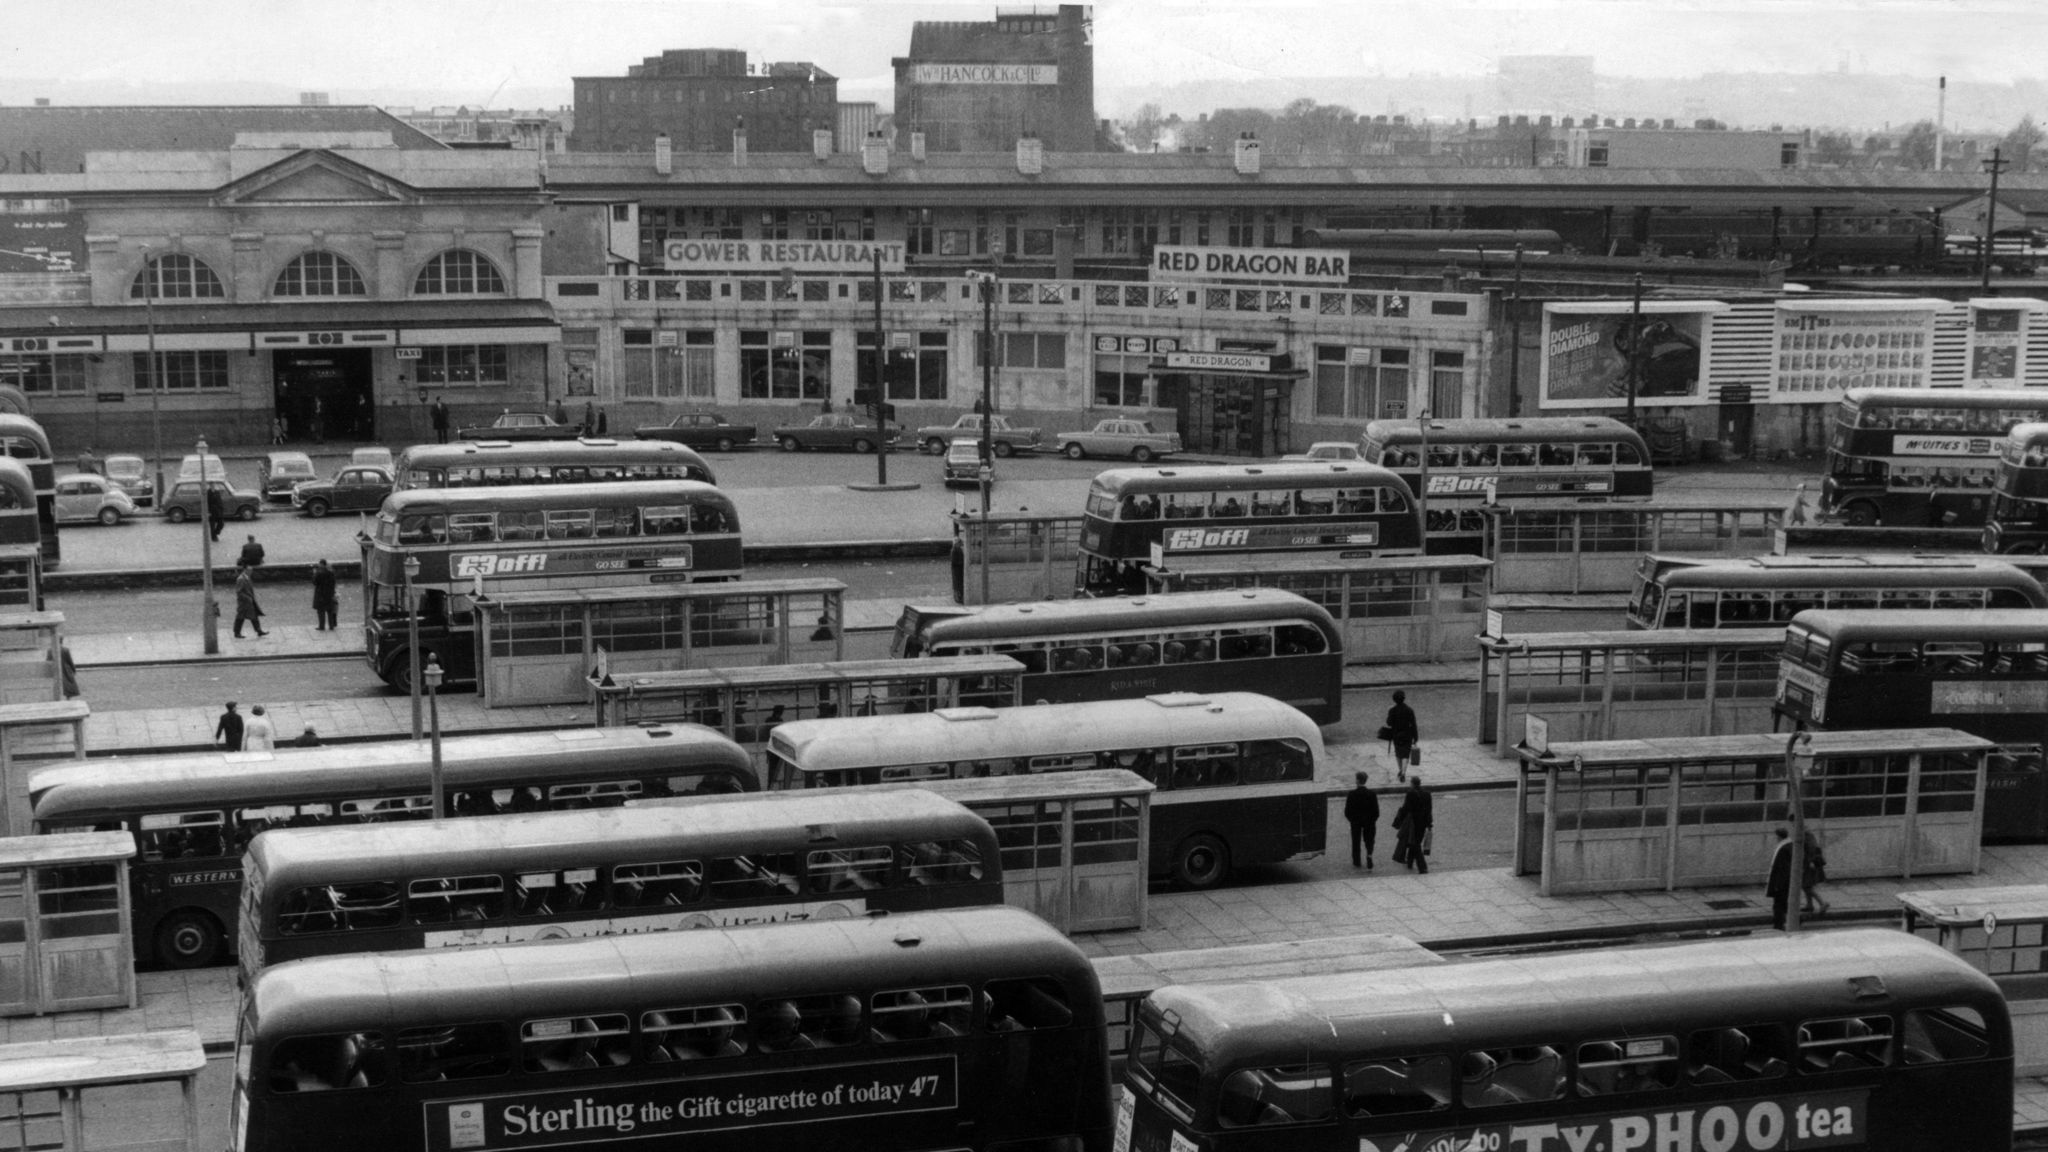 Black and white photo of Cardiff's former bus station. It shows buses lined up in the bays in the station